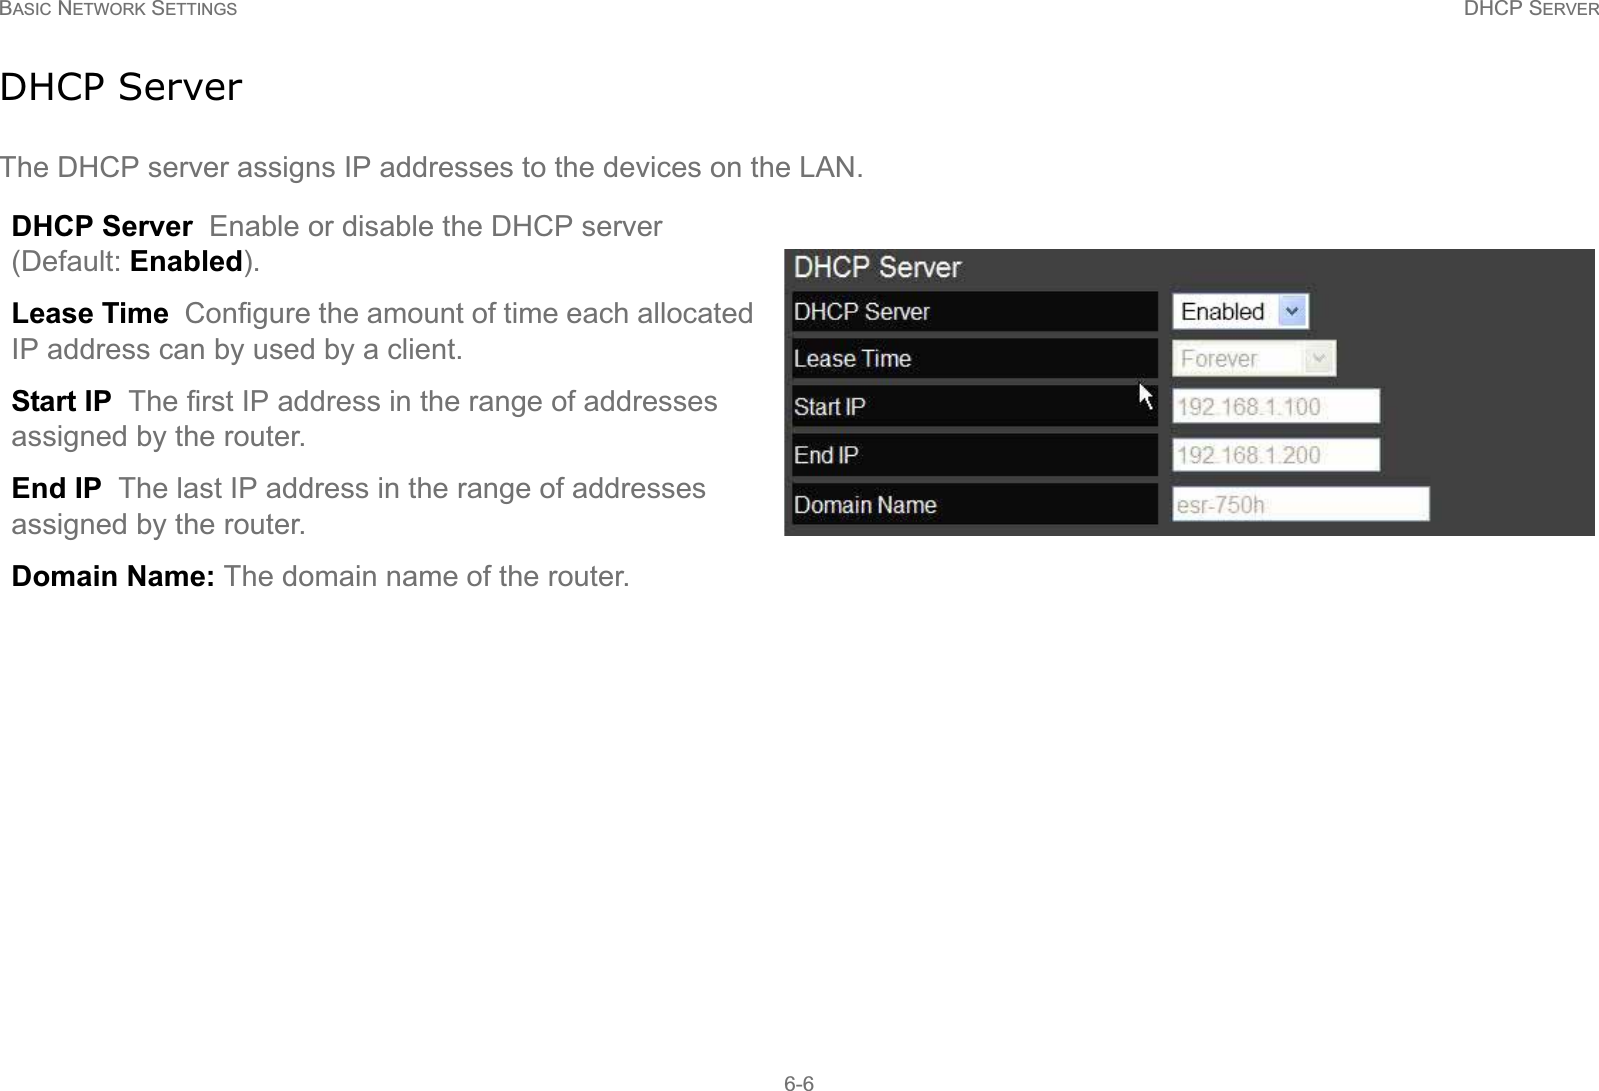 BASIC NETWORK SETTINGS DHCP SERVER6-6DHCP ServerThe DHCP server assigns IP addresses to the devices on the LAN.DHCP Server  Enable or disable the DHCP server (Default: Enabled).Lease Time  Configure the amount of time each allocated IP address can by used by a client.Start IP  The first IP address in the range of addresses assigned by the router.End IP  The last IP address in the range of addresses assigned by the router.Domain Name: The domain name of the router.